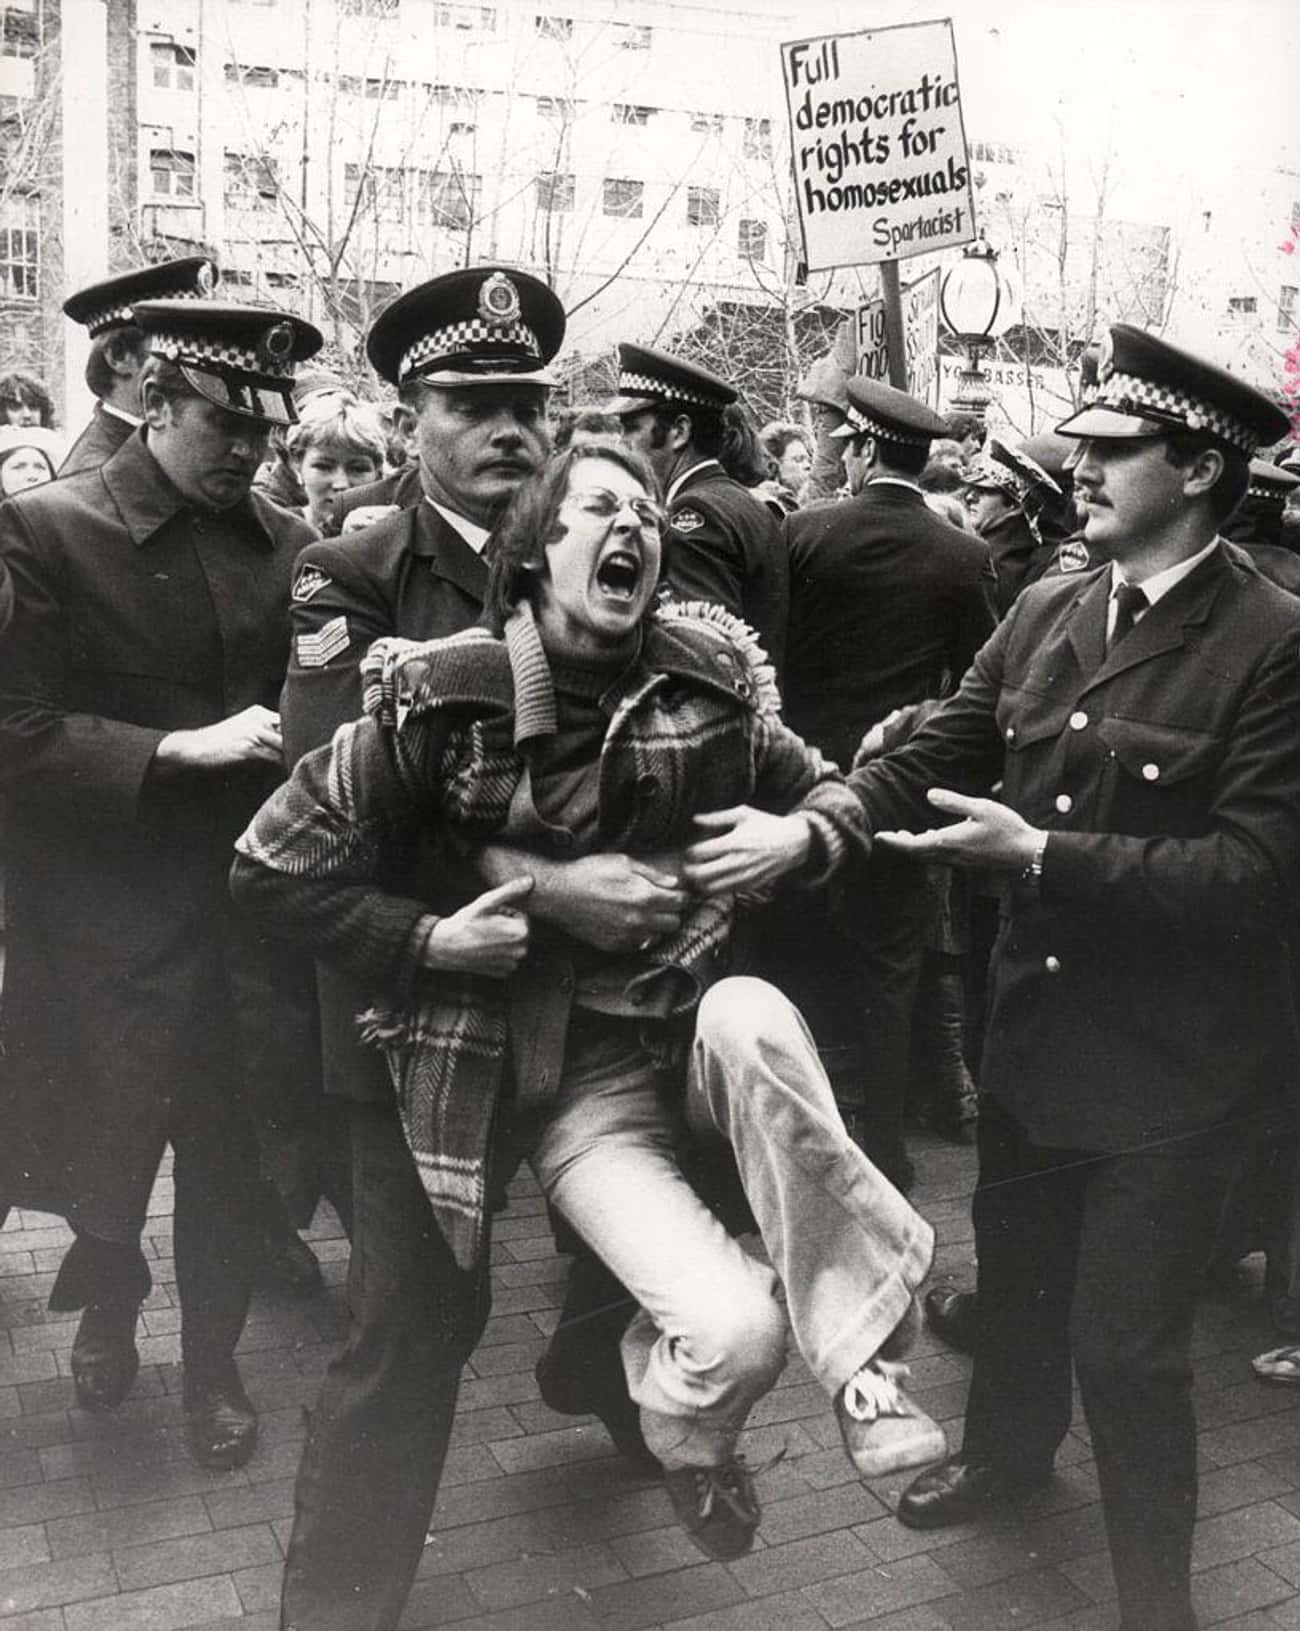 An Activist Demonstrates Before Being Arrested In Sydney, 1978 